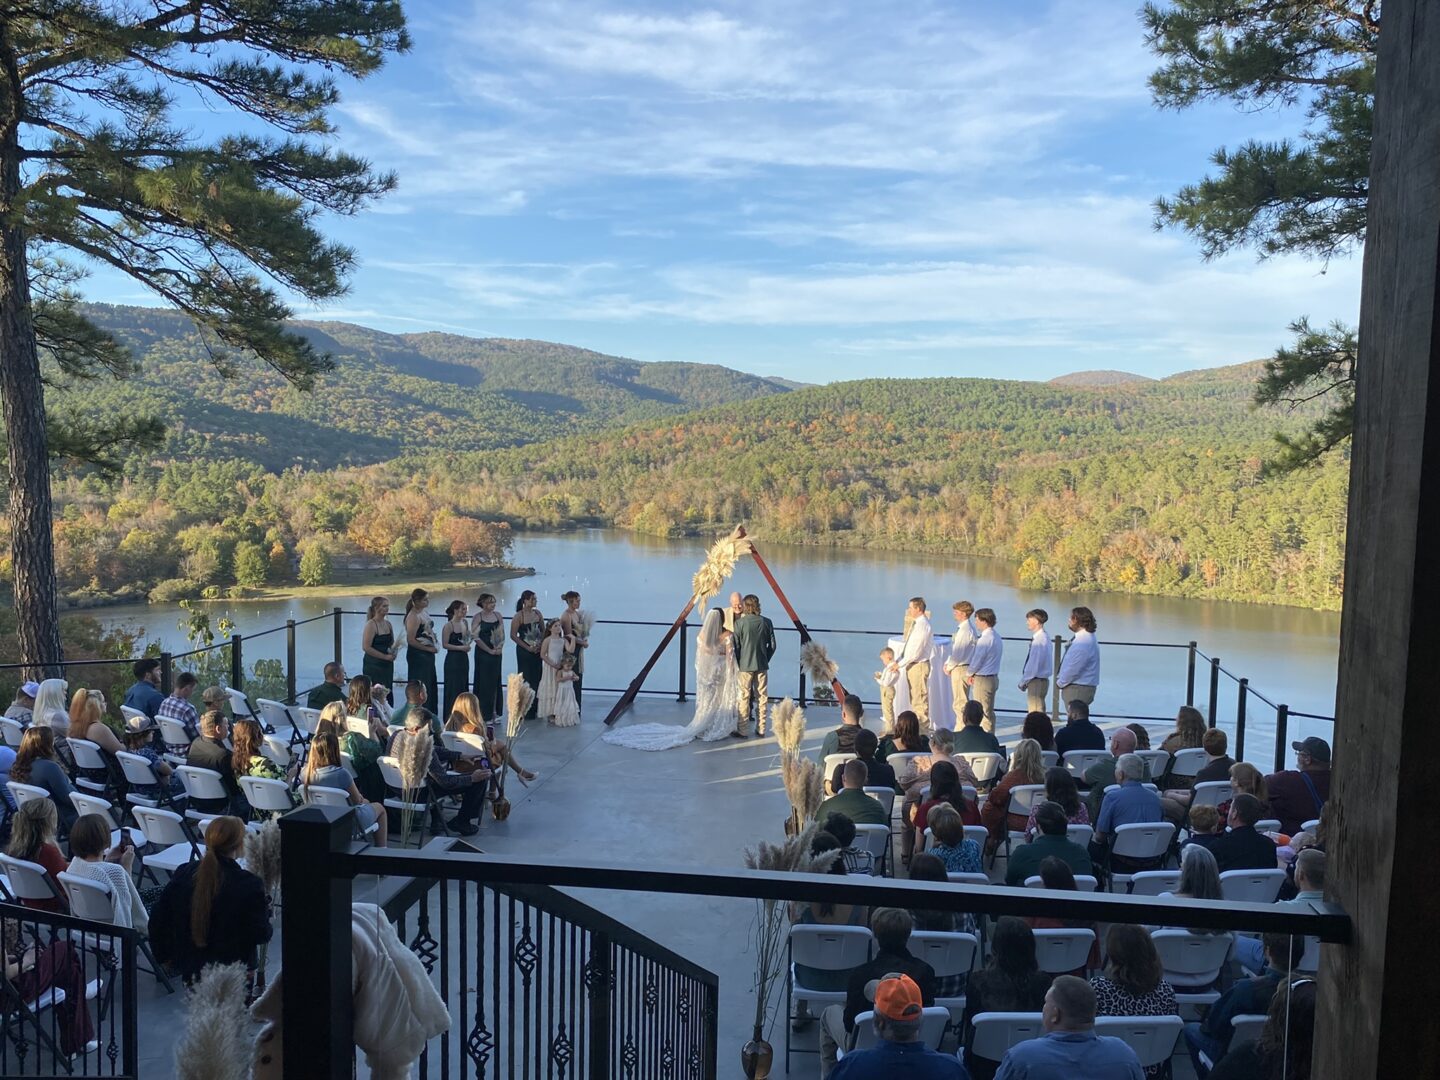 A wedding ceremony on the deck of a boat.